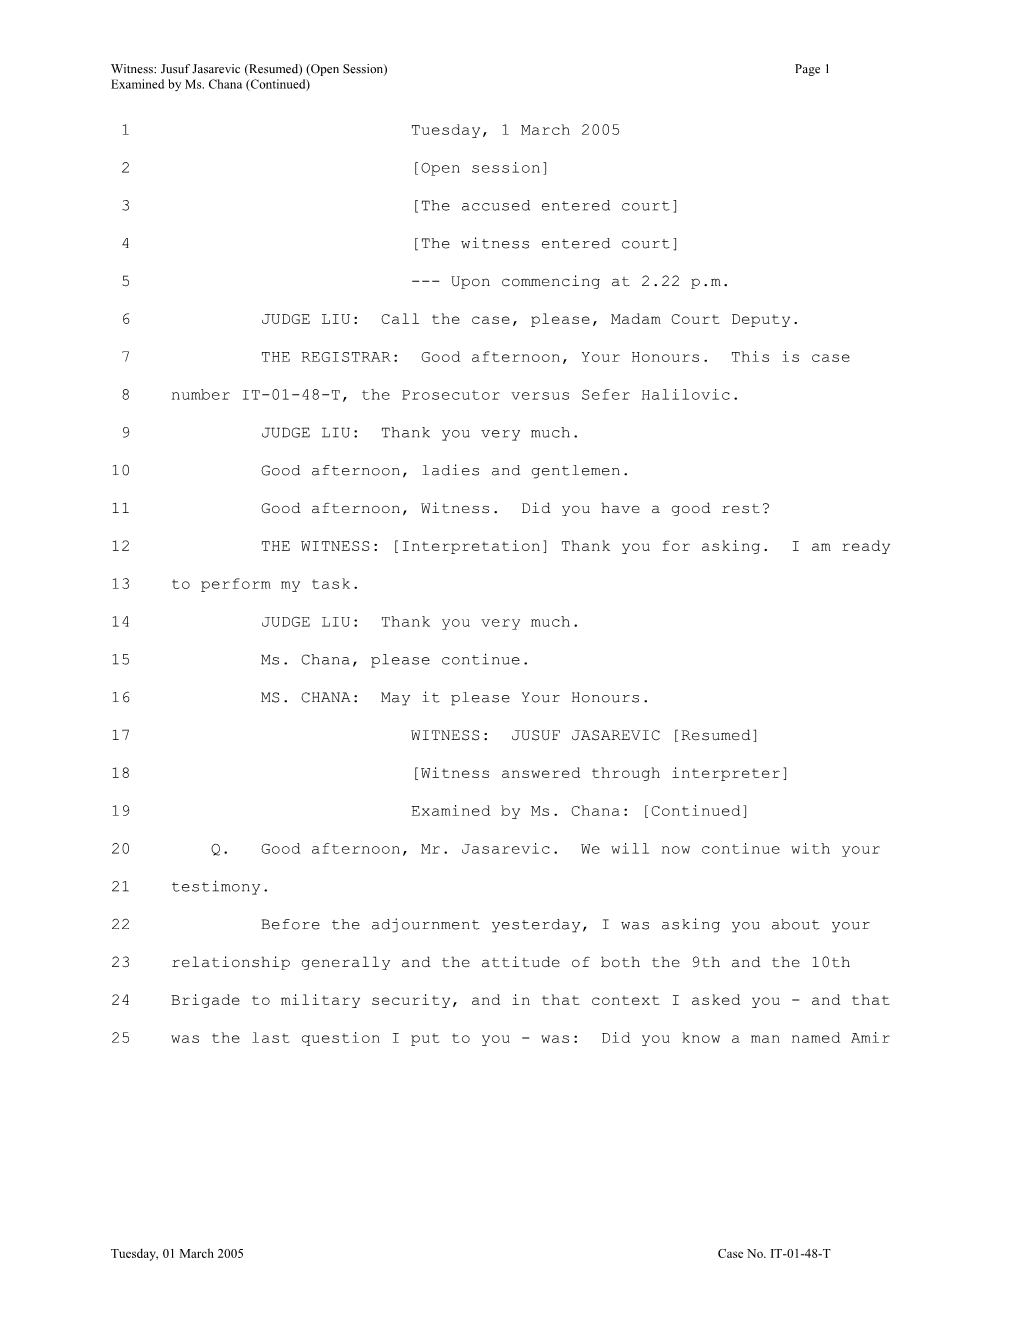 Witness: Jusuf Jasarevic (Resumed) (Open Session)Page 1